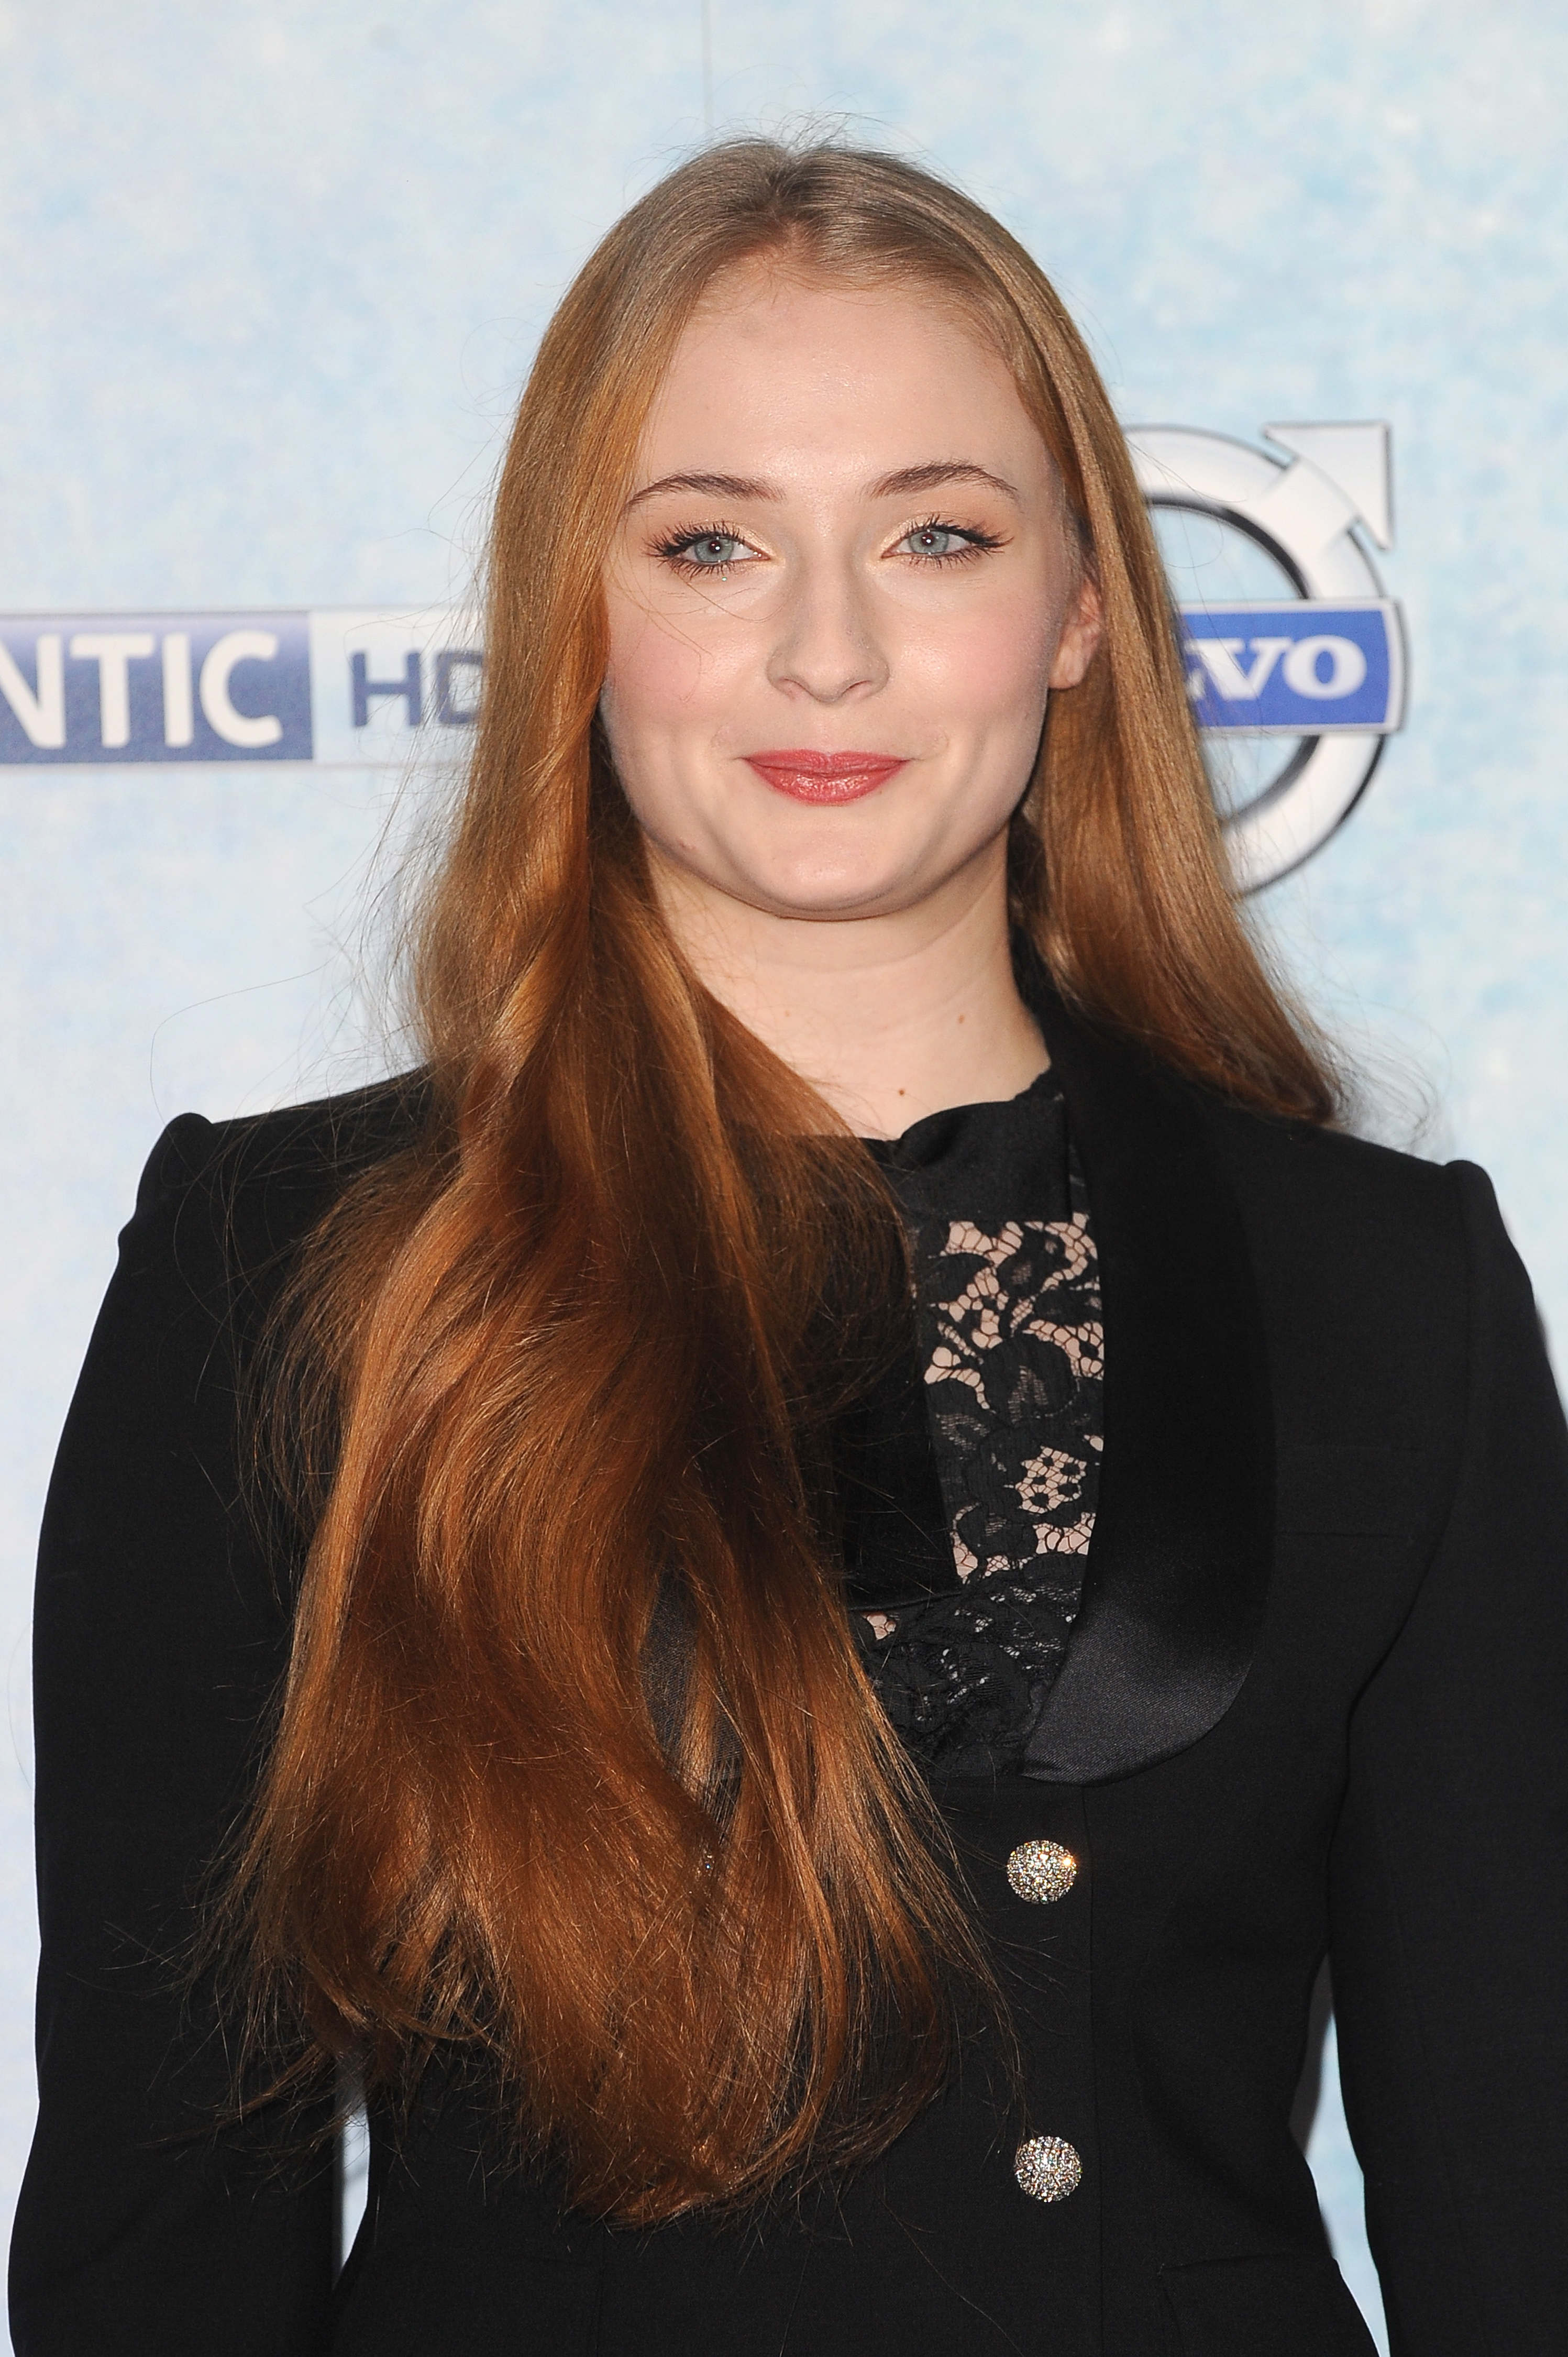 Sophie Turner (actress) photo 83 of 945 pics, wallpaper - photo #687700 - ThePlace22994 x 4500